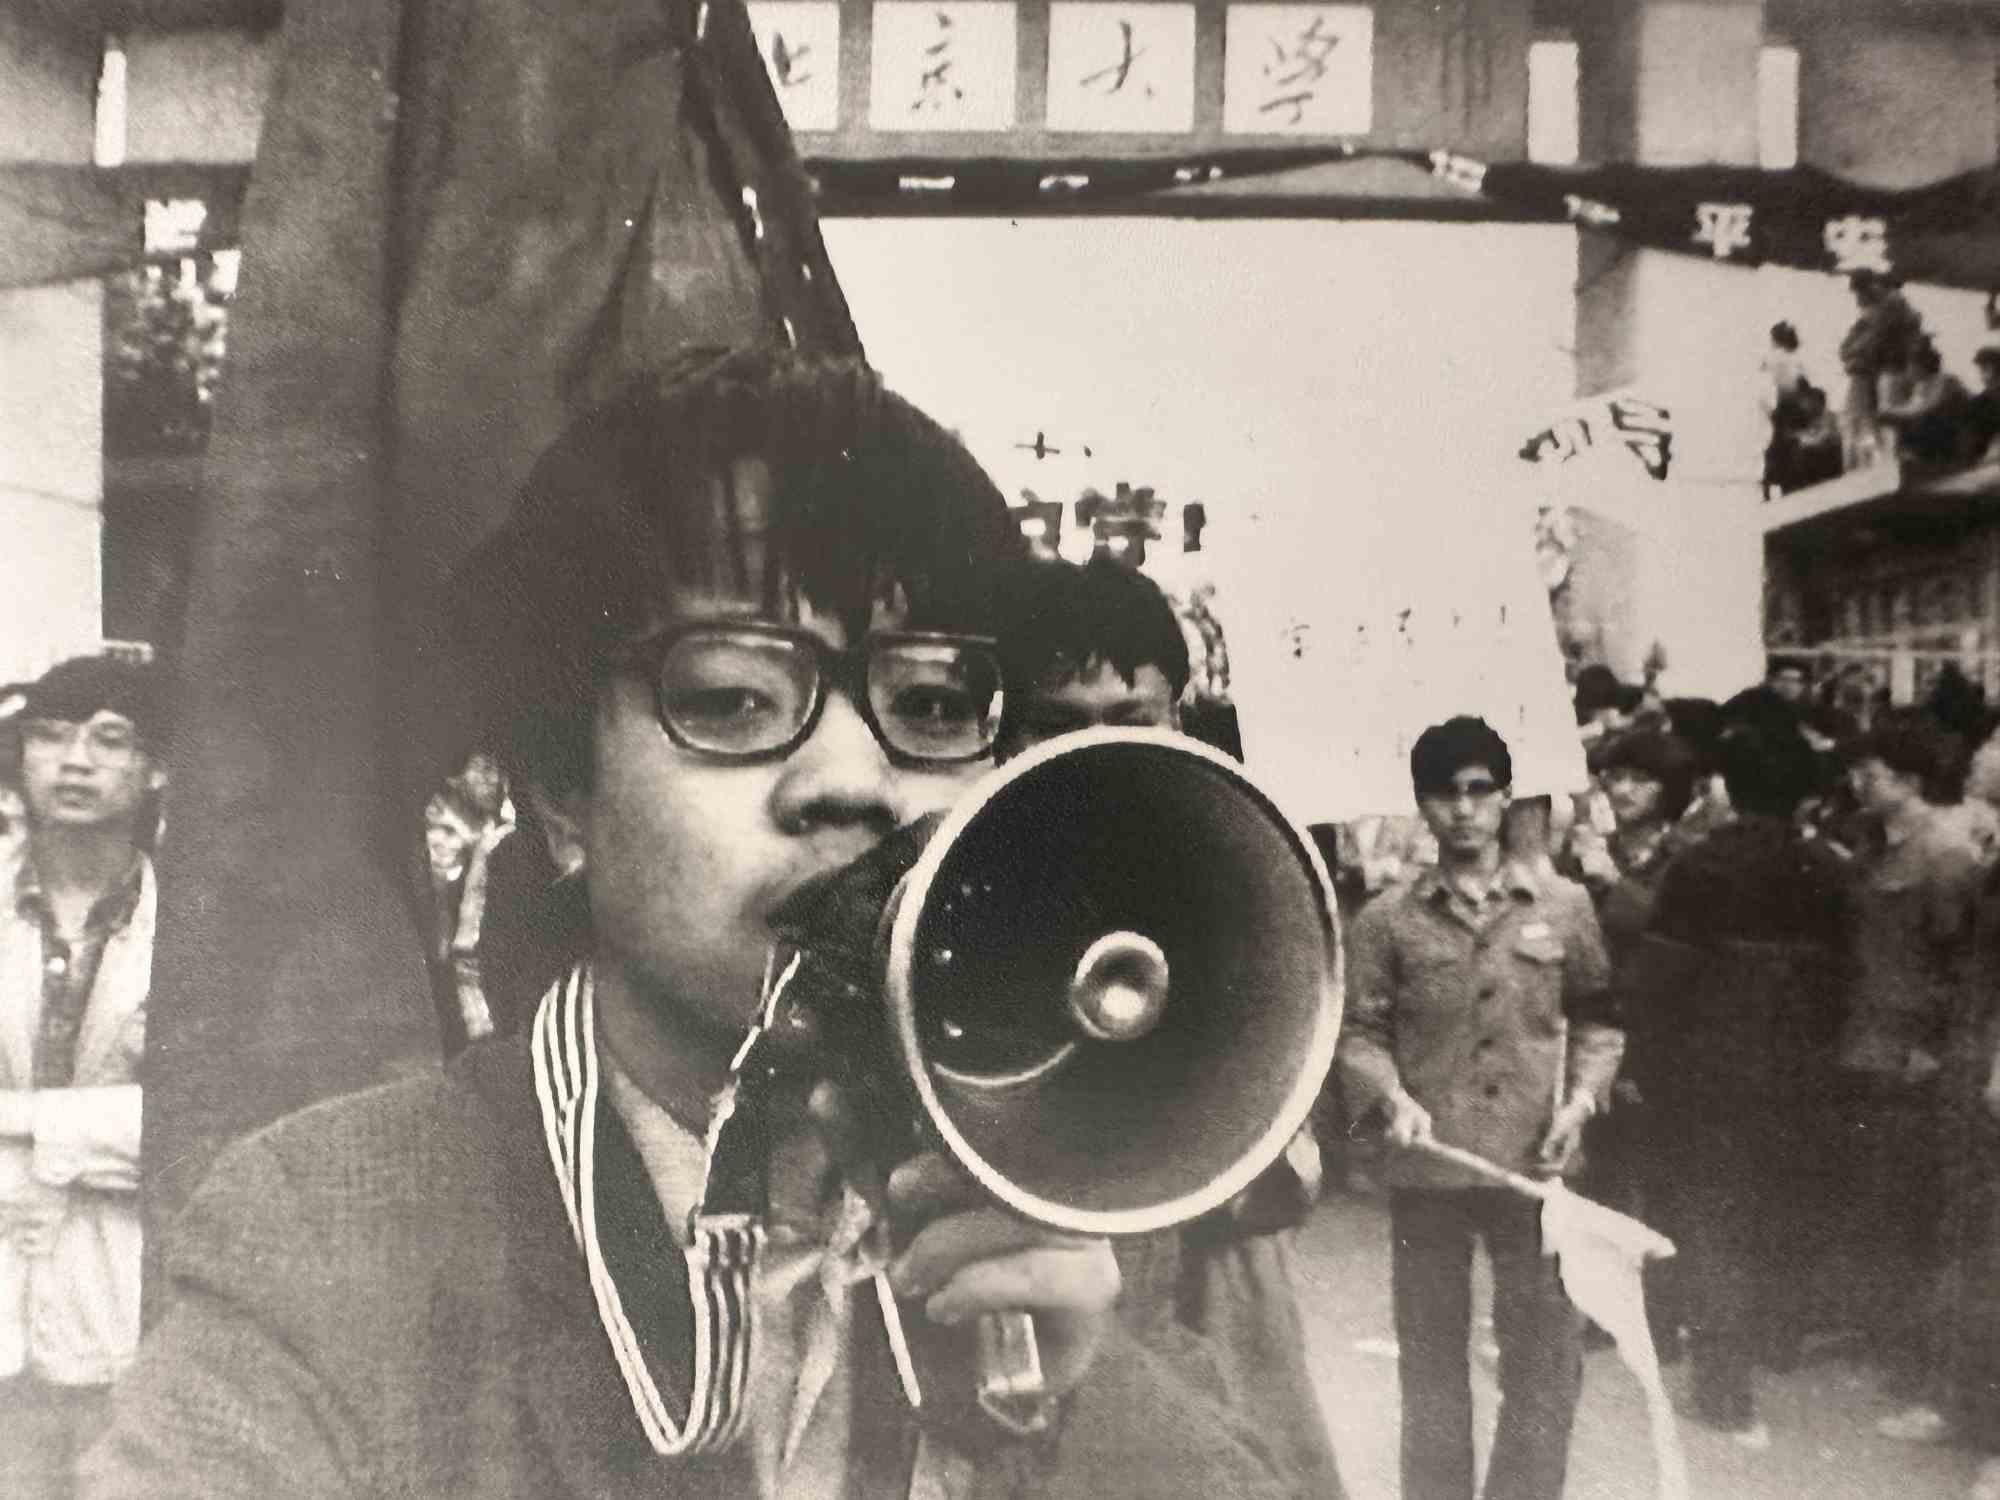 Unknown Figurative Photograph - Historical Photo  - Students' Protest China - Vintage photo - 1970s